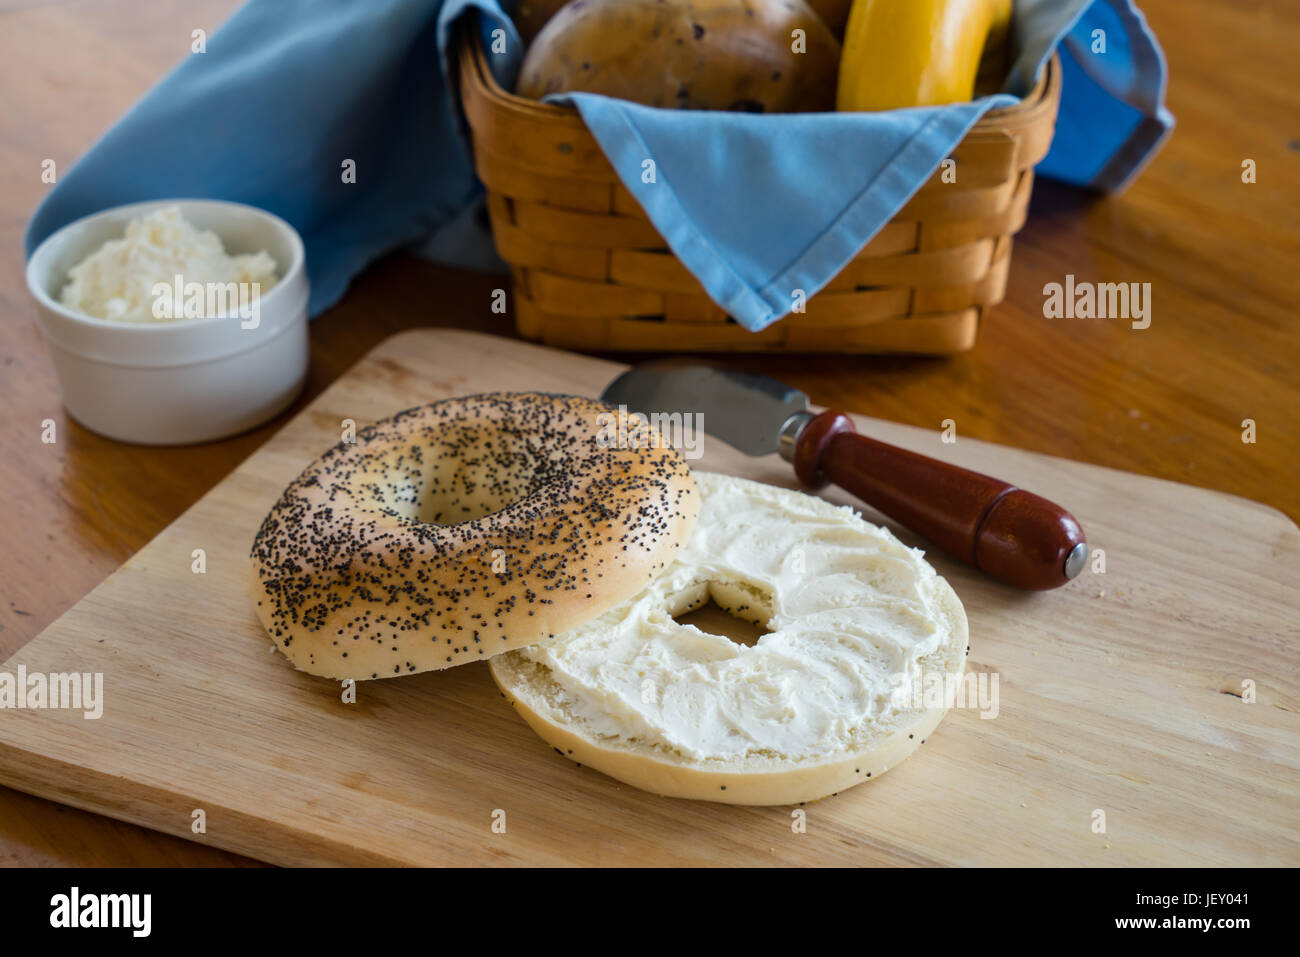 Poppy seed bagel with cream cheese with a basket of assorted bagels in the background. Stock Photo